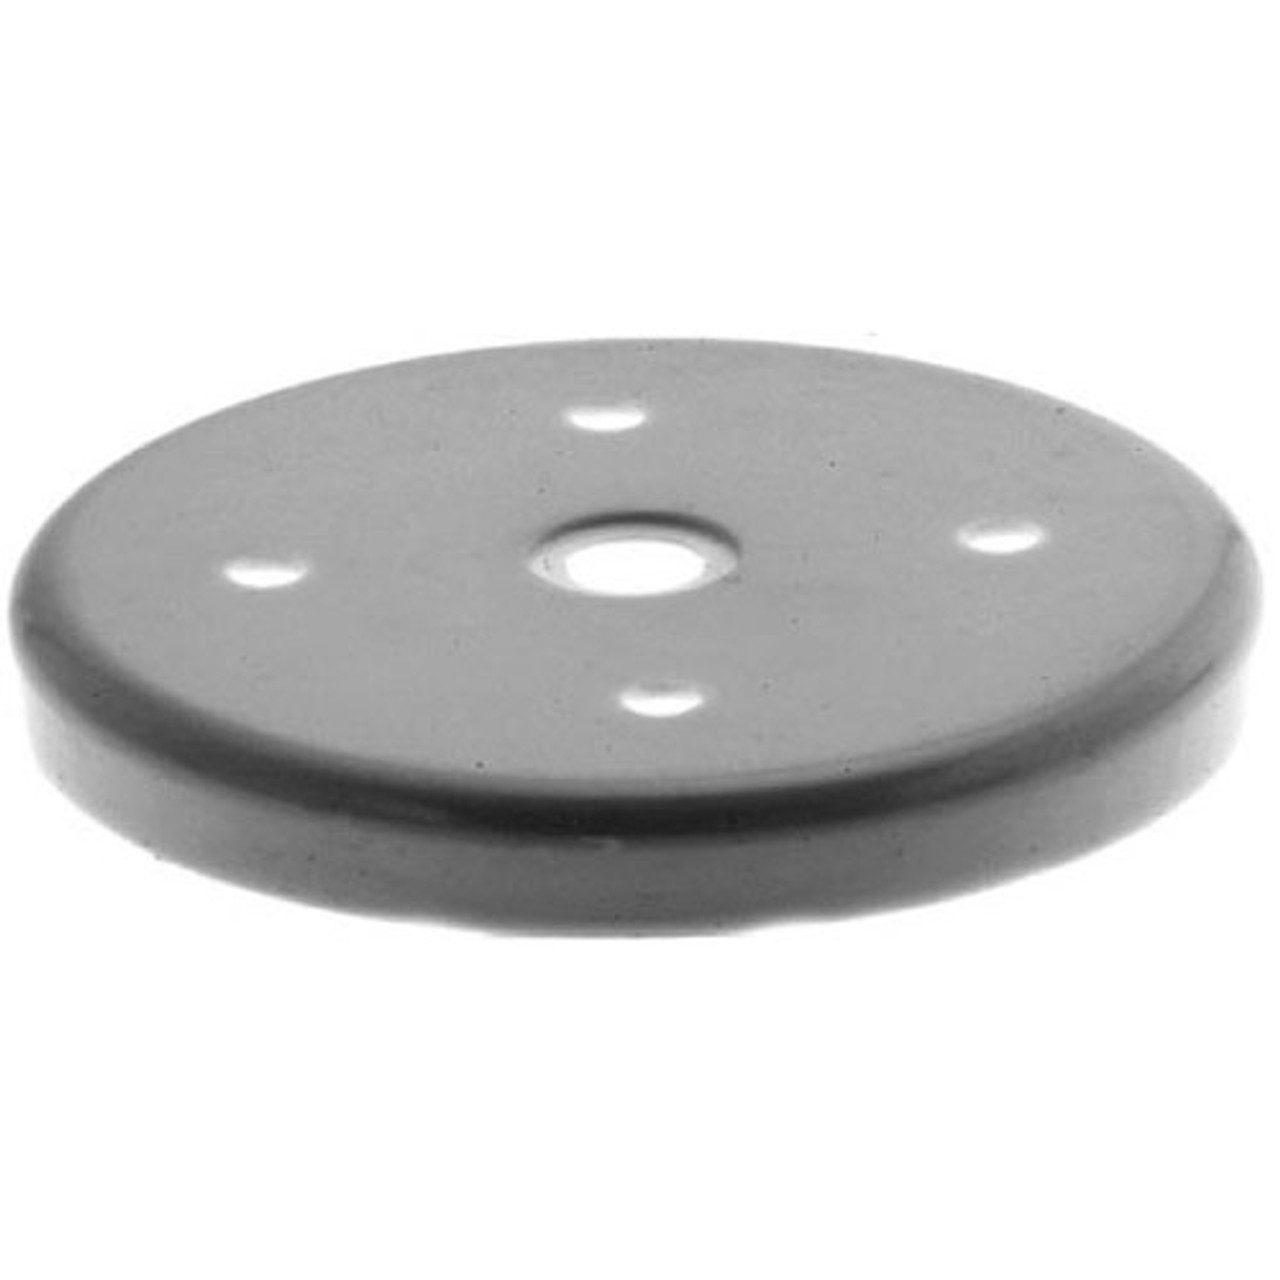 Knockout Cup - Plastic, 4.095 Dia - Replacement Part For Hollymatic 910-1215